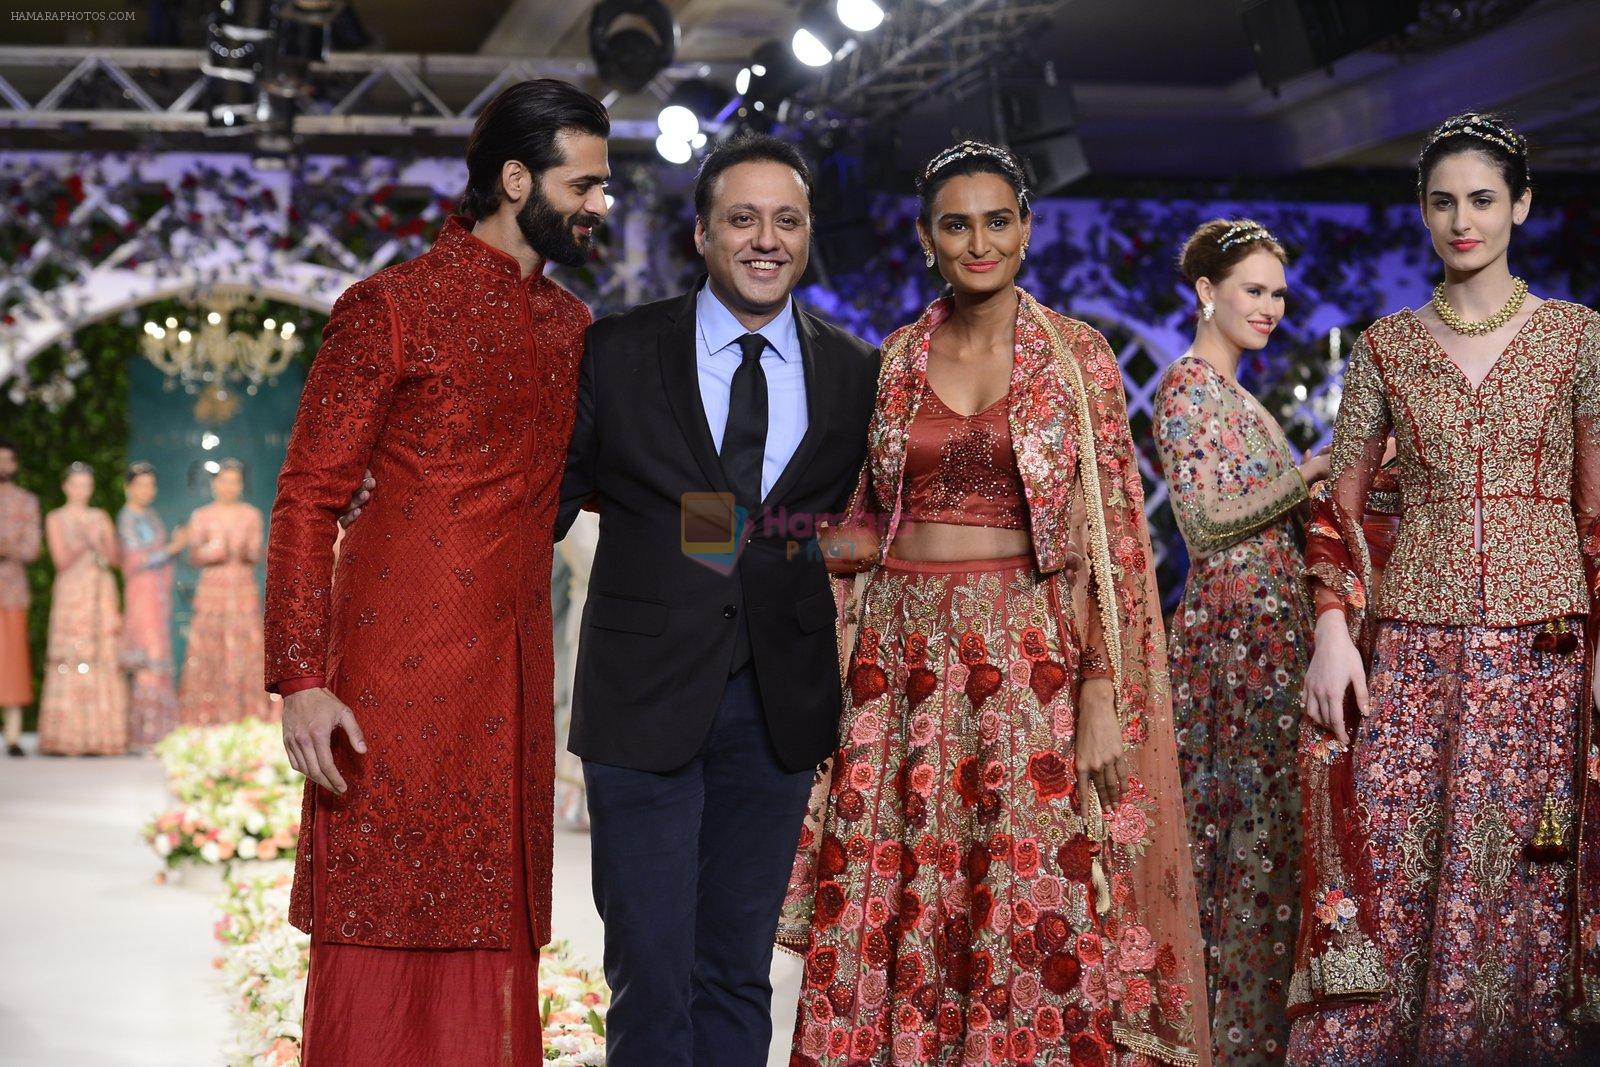 Varun Bahl during Varun Bahl show Vintage Garden at the India Couture Week 2016, in New Delhi, India on July 23, 2016